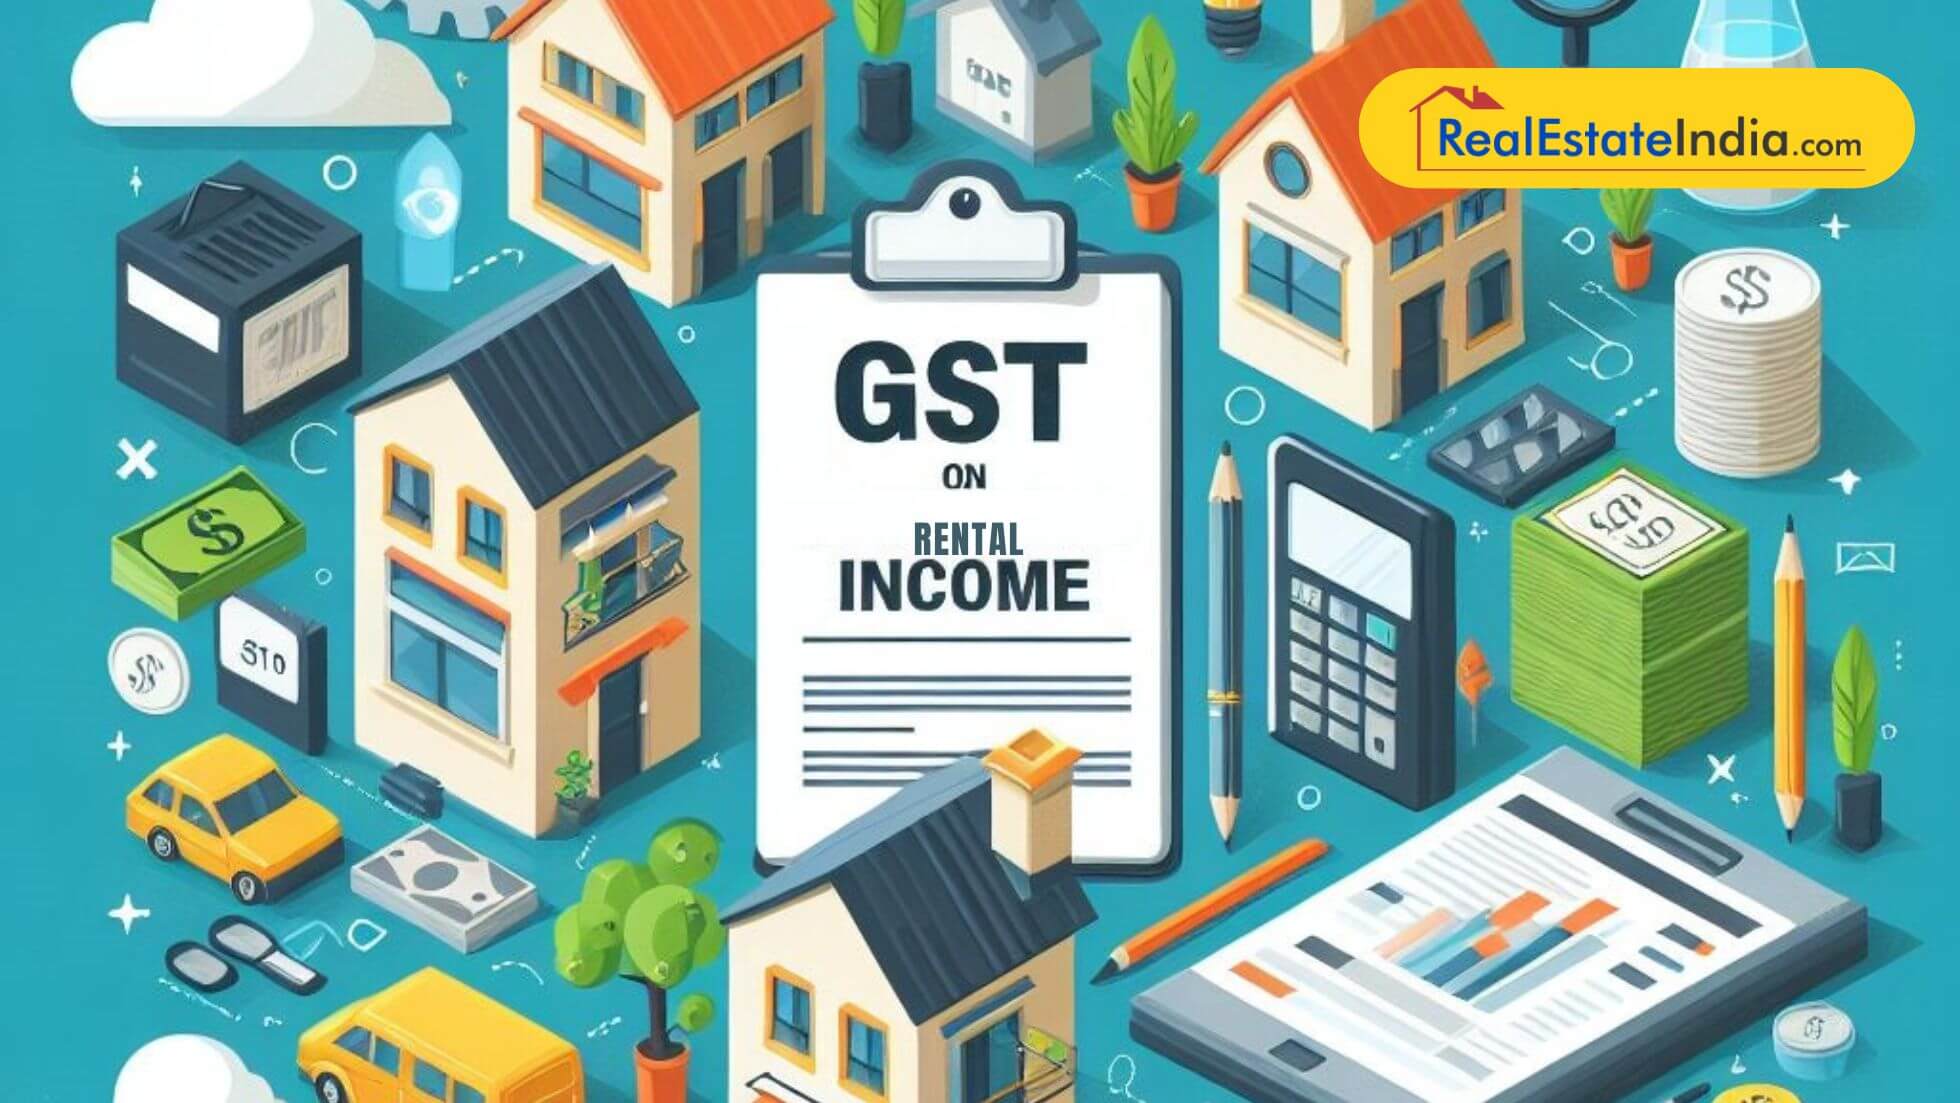 GST on Rental Income @18: Residential and Commercial Property